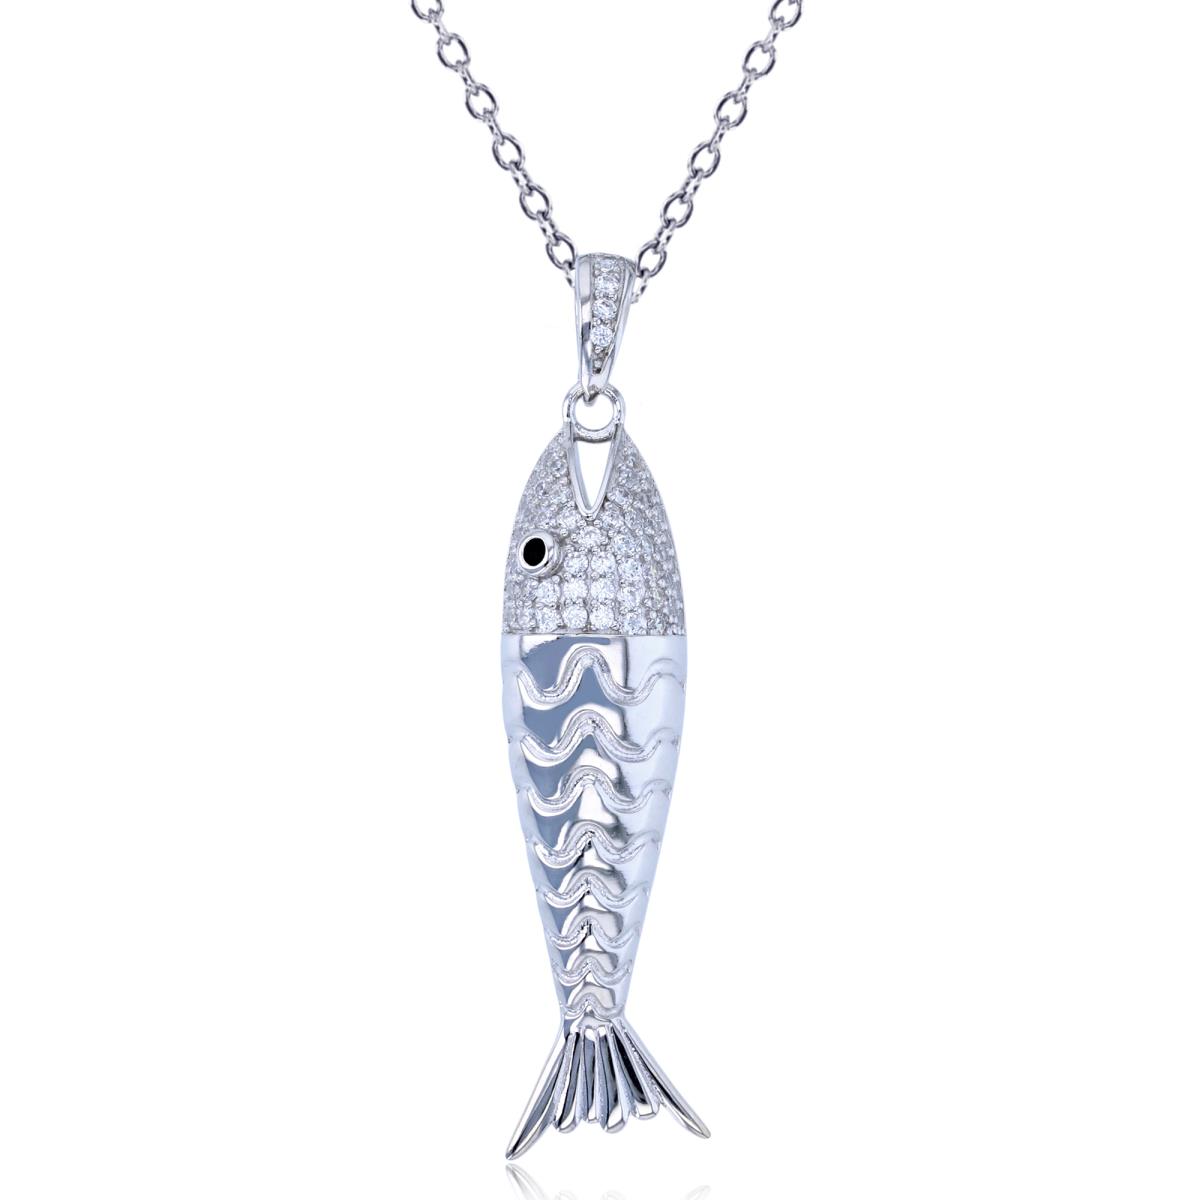 Sterling Silver Rhodium Rnd White/Black CZ Polished & Textured Fish 18"Necklace